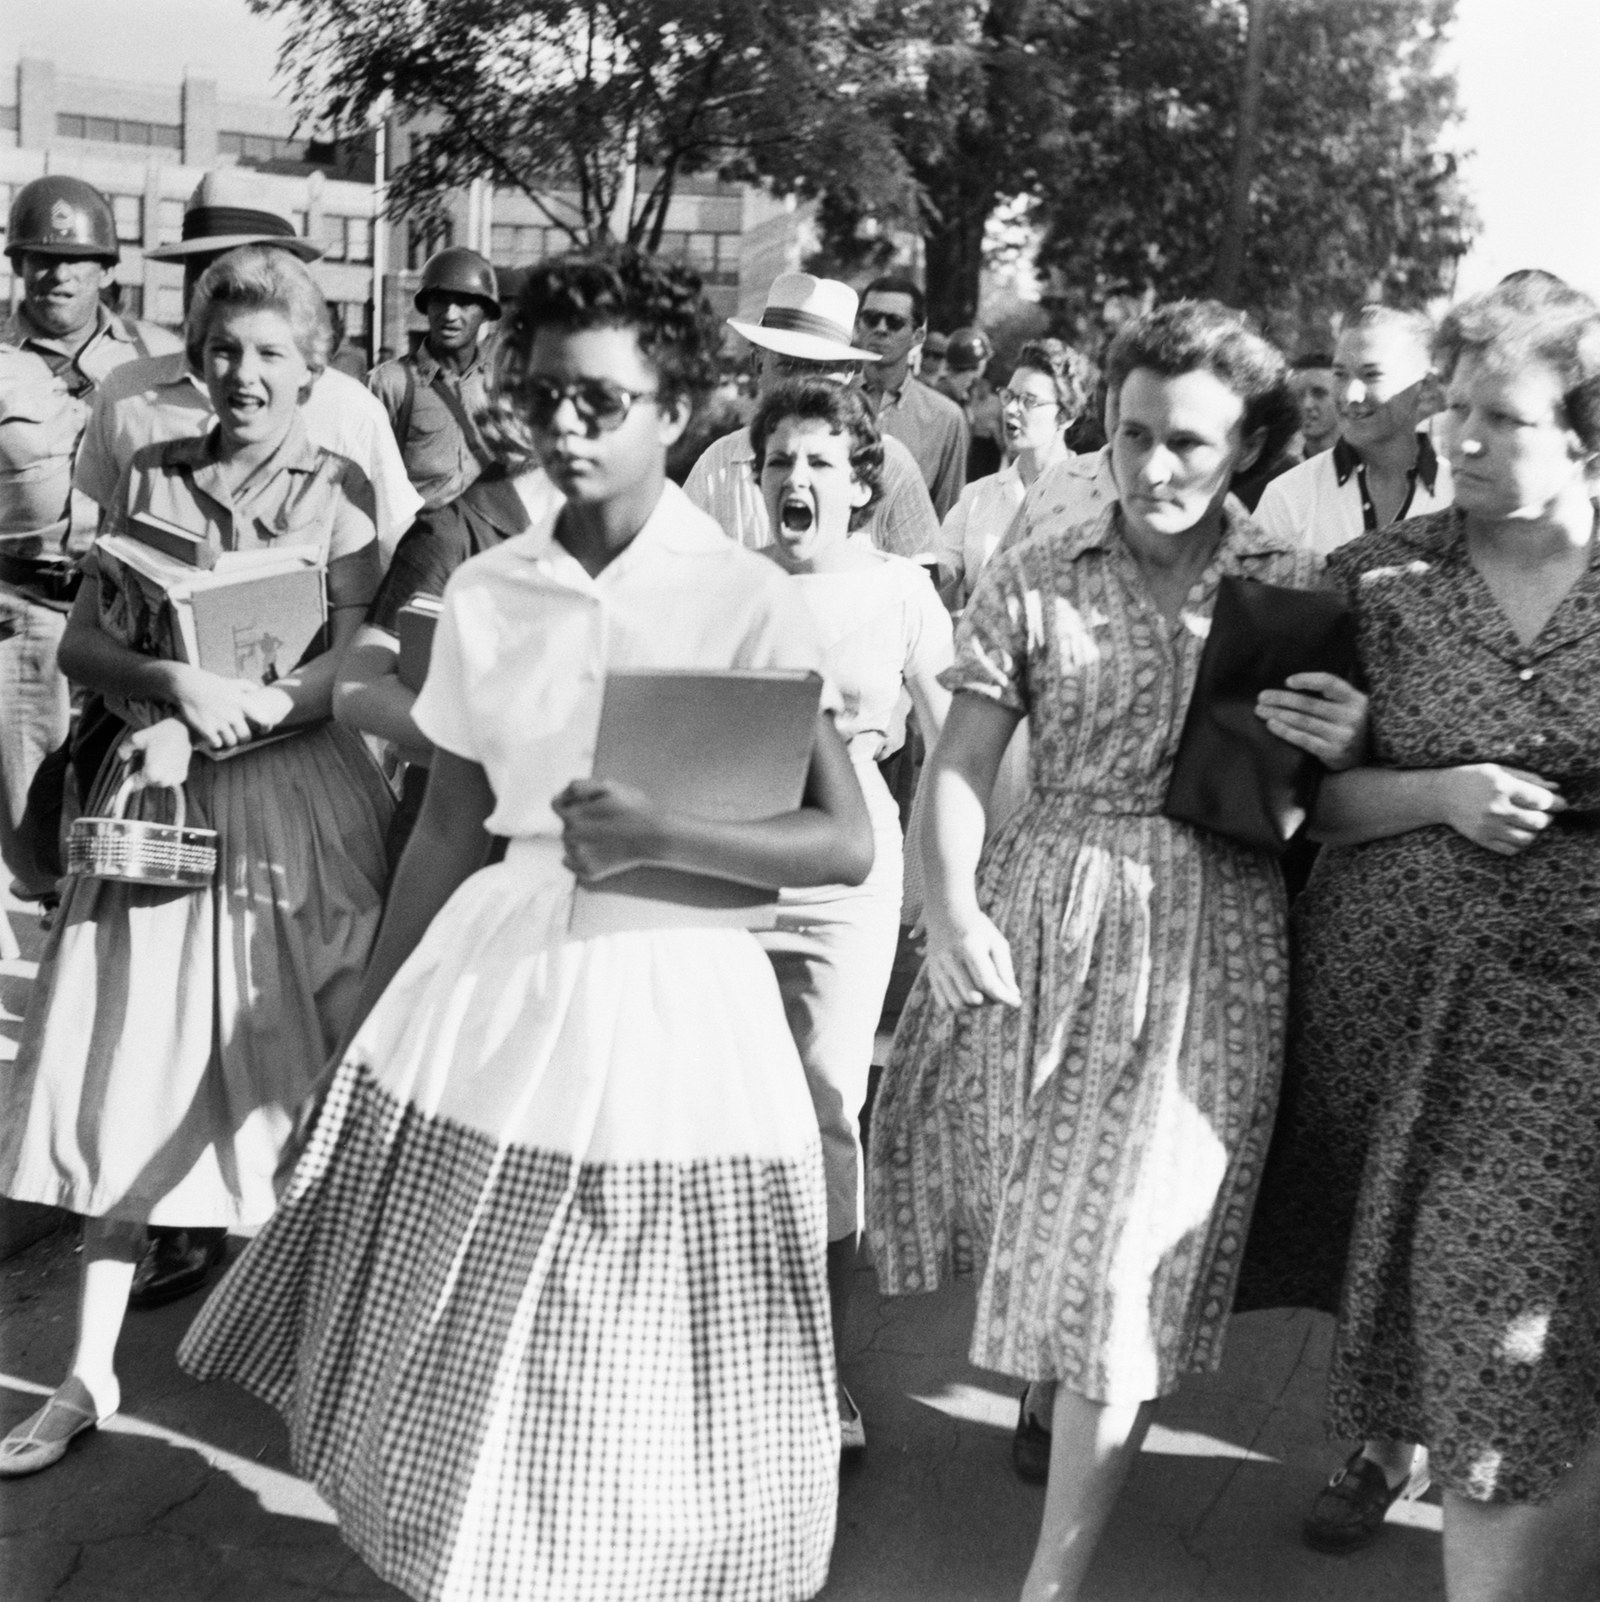 A black girl wearing a dress and sunglasses carrying books walking away from a white girl behind her who is yelling at her